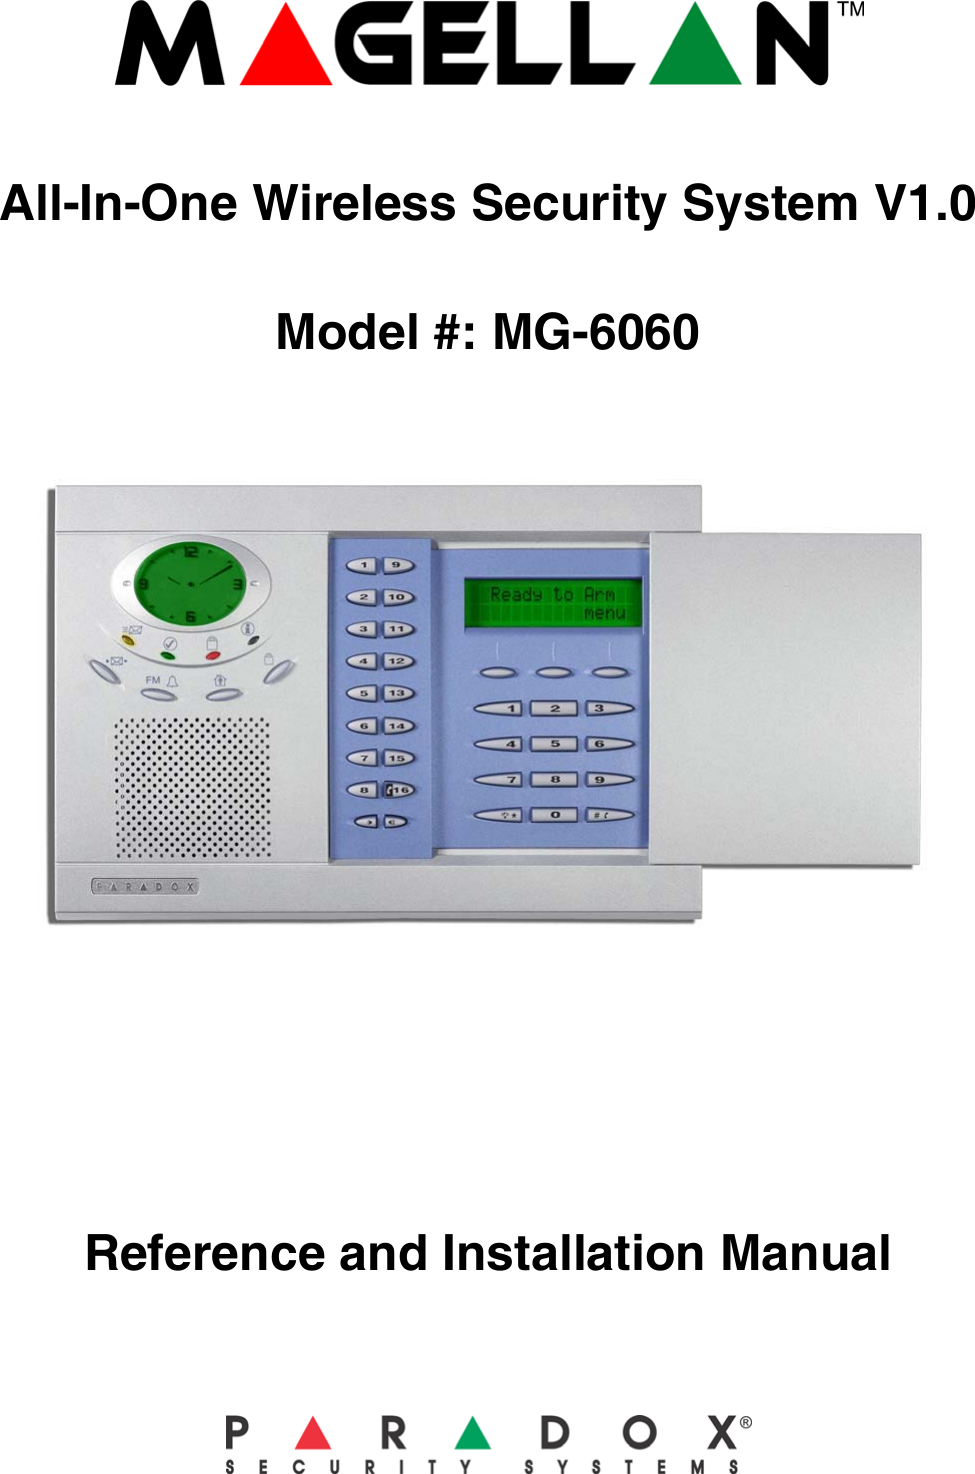 All-In-One Wireless Security System V1.0Model #: MG-6060Reference and Installation Manual